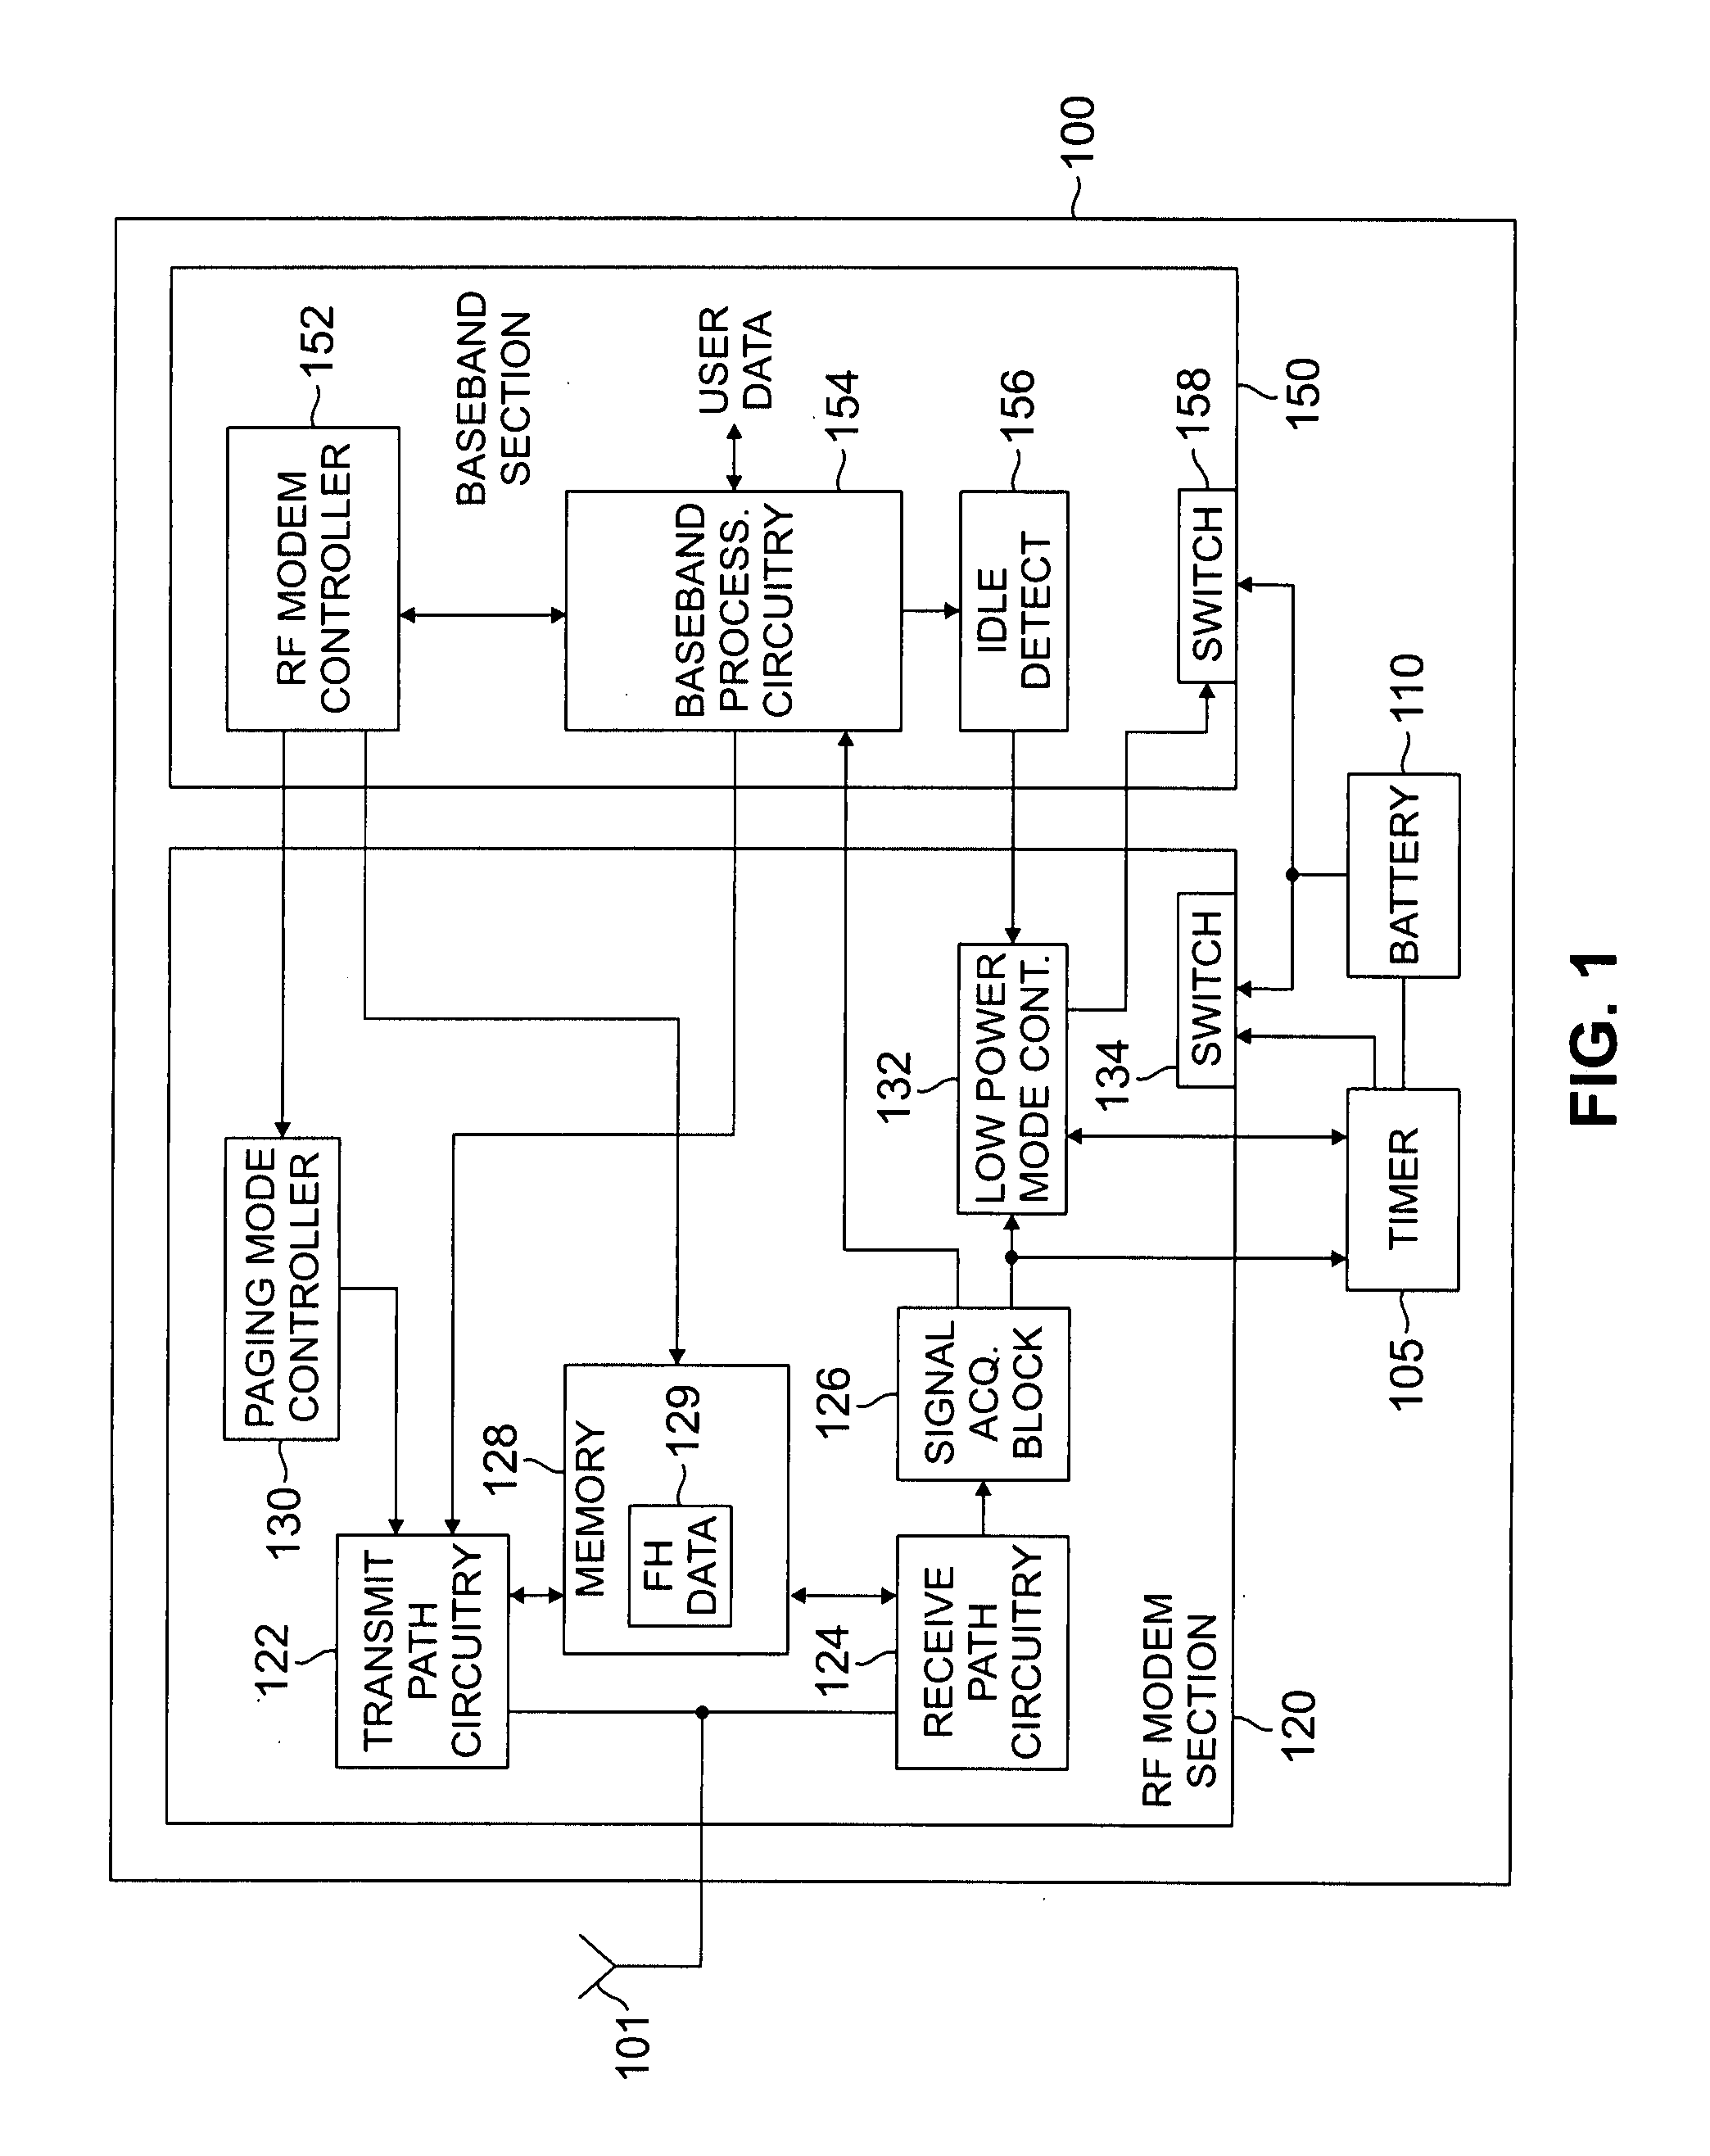 Apparatus and method for reducing power consumption in wireless RF systems